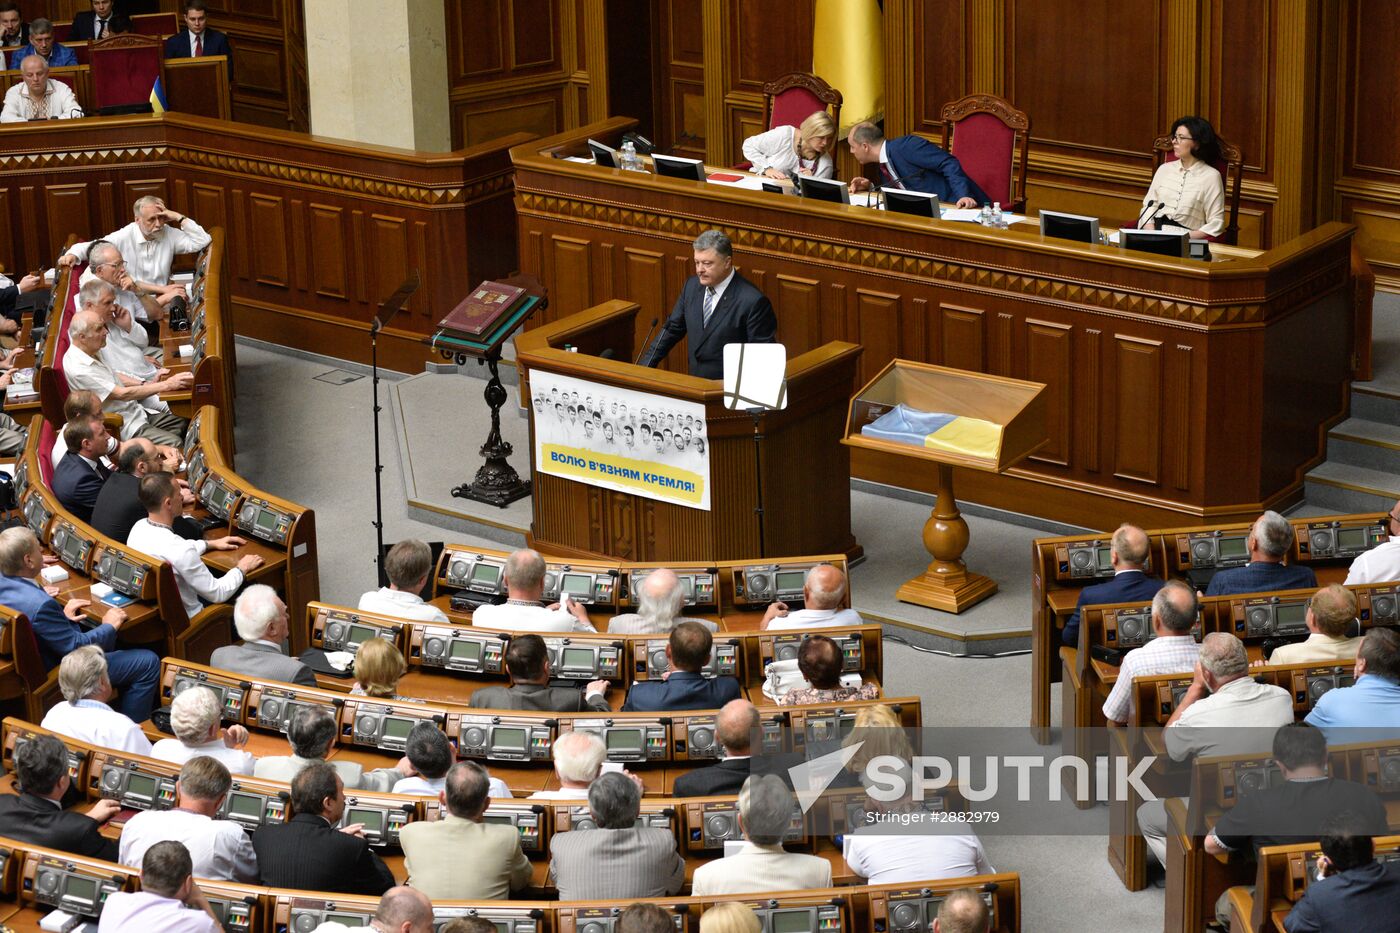 Meeting devoted to 20th anniversary of Ukraine's Constitution